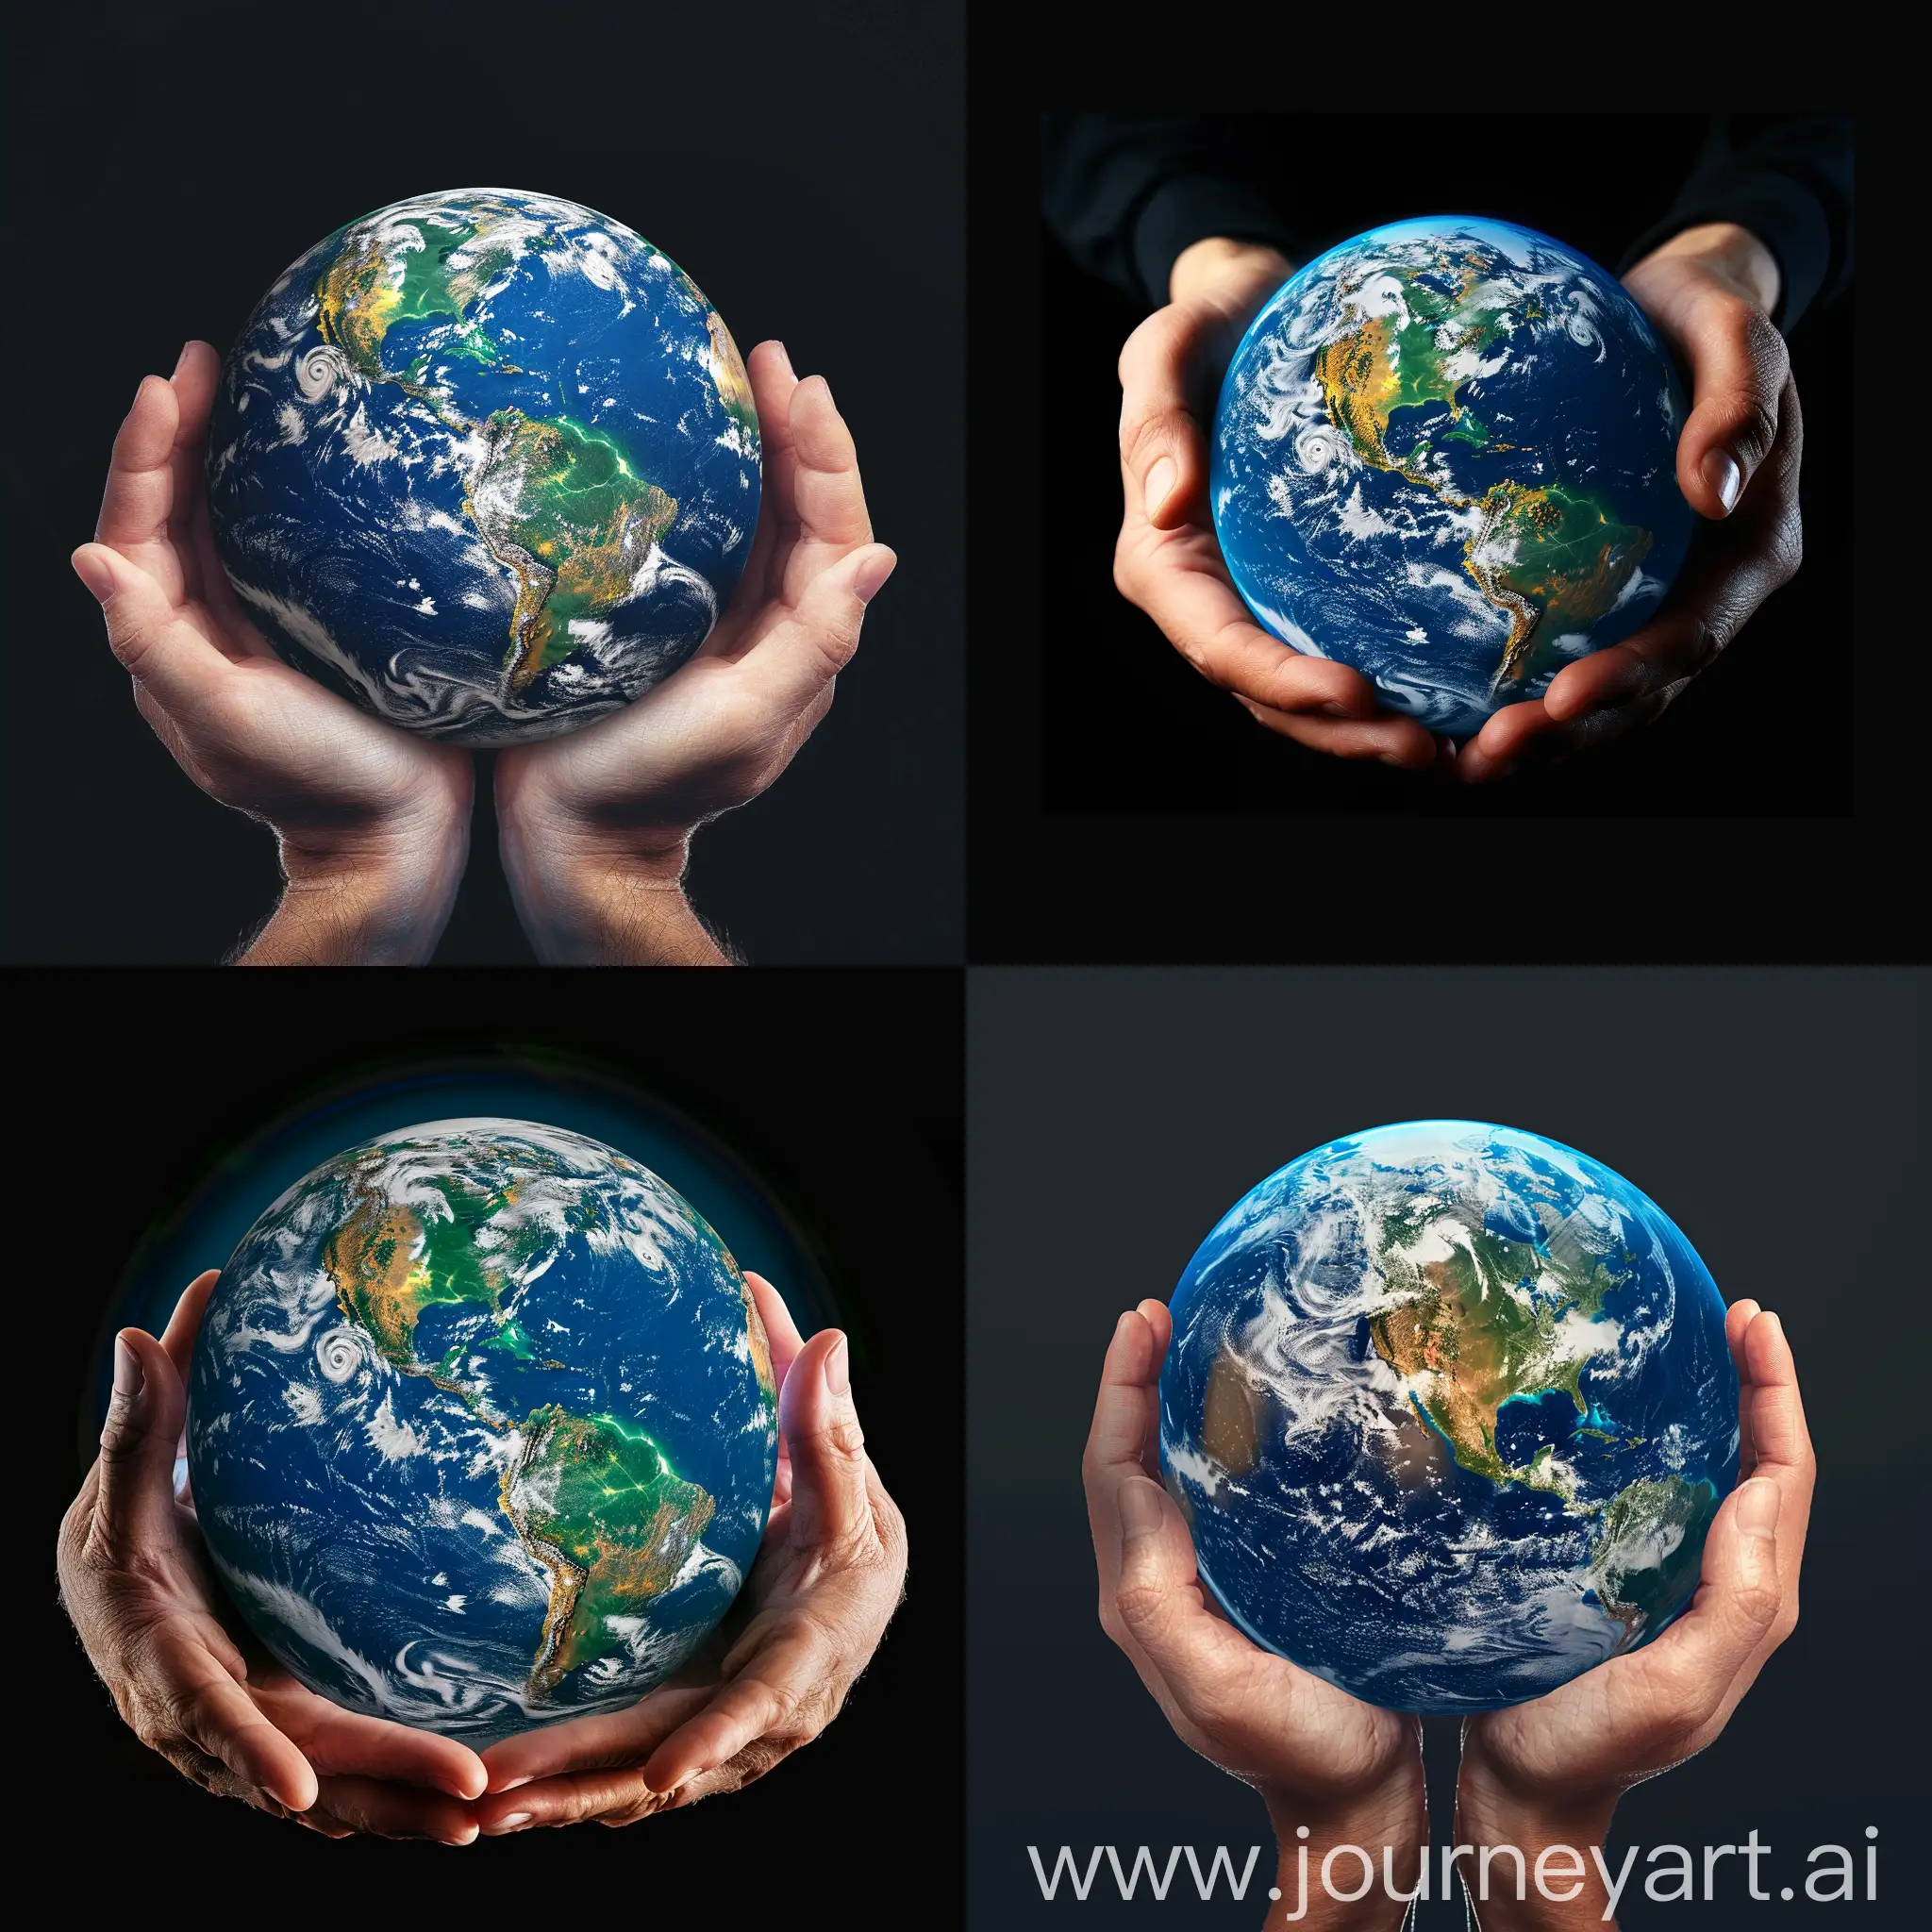 Generate a super realistic image with two hands holding the Earth, into enchants beauty , ready for traveling and exploring. Make it landscape wide